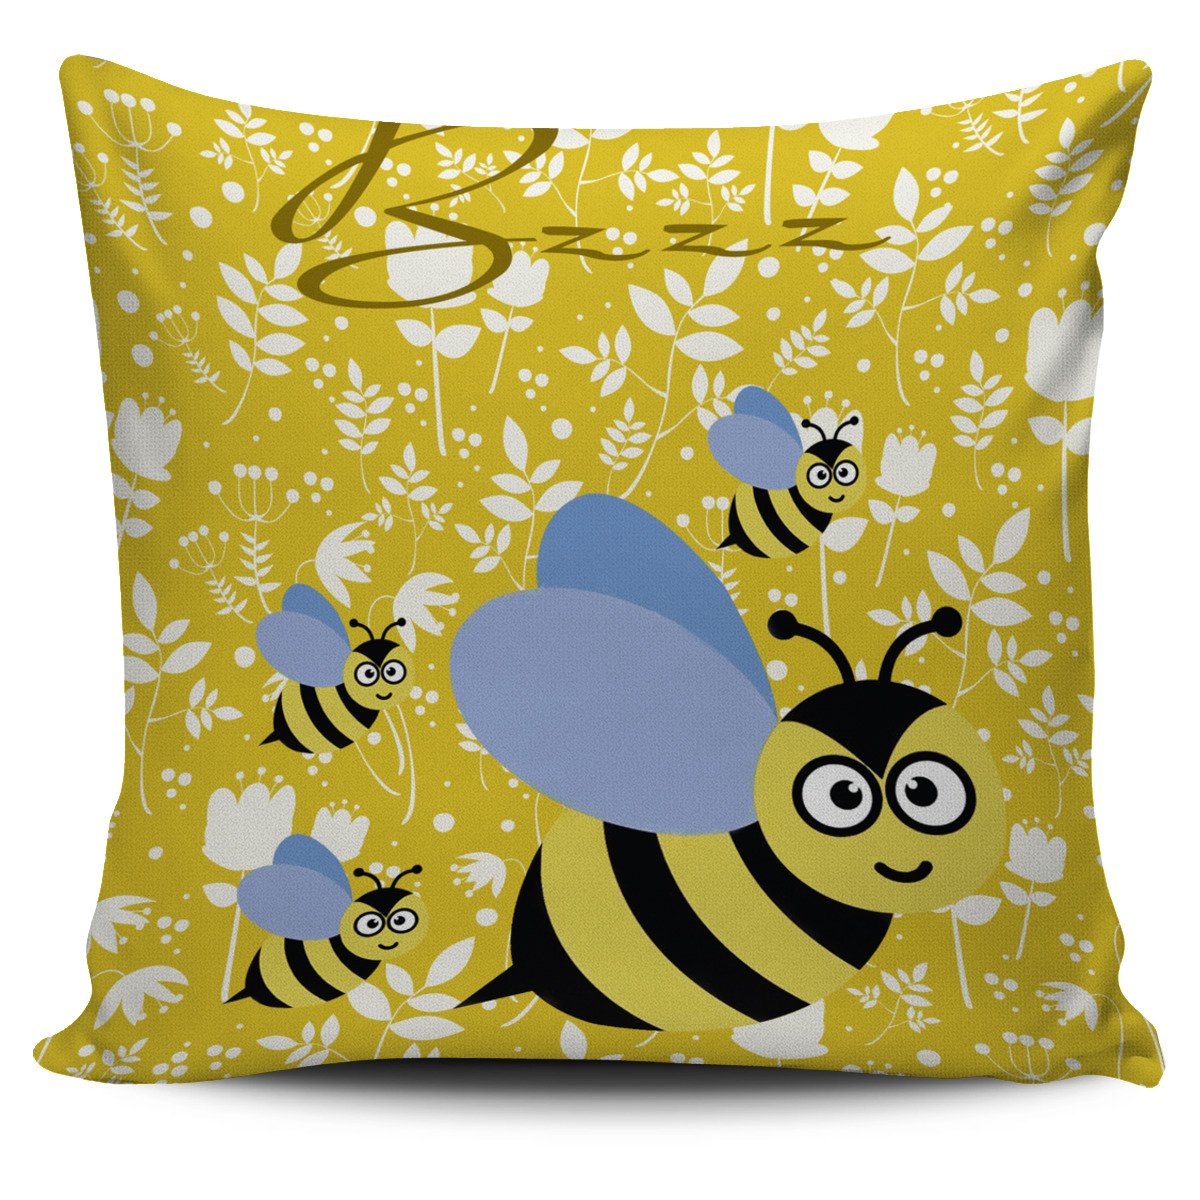 Honey Bee Pillow Covers 1